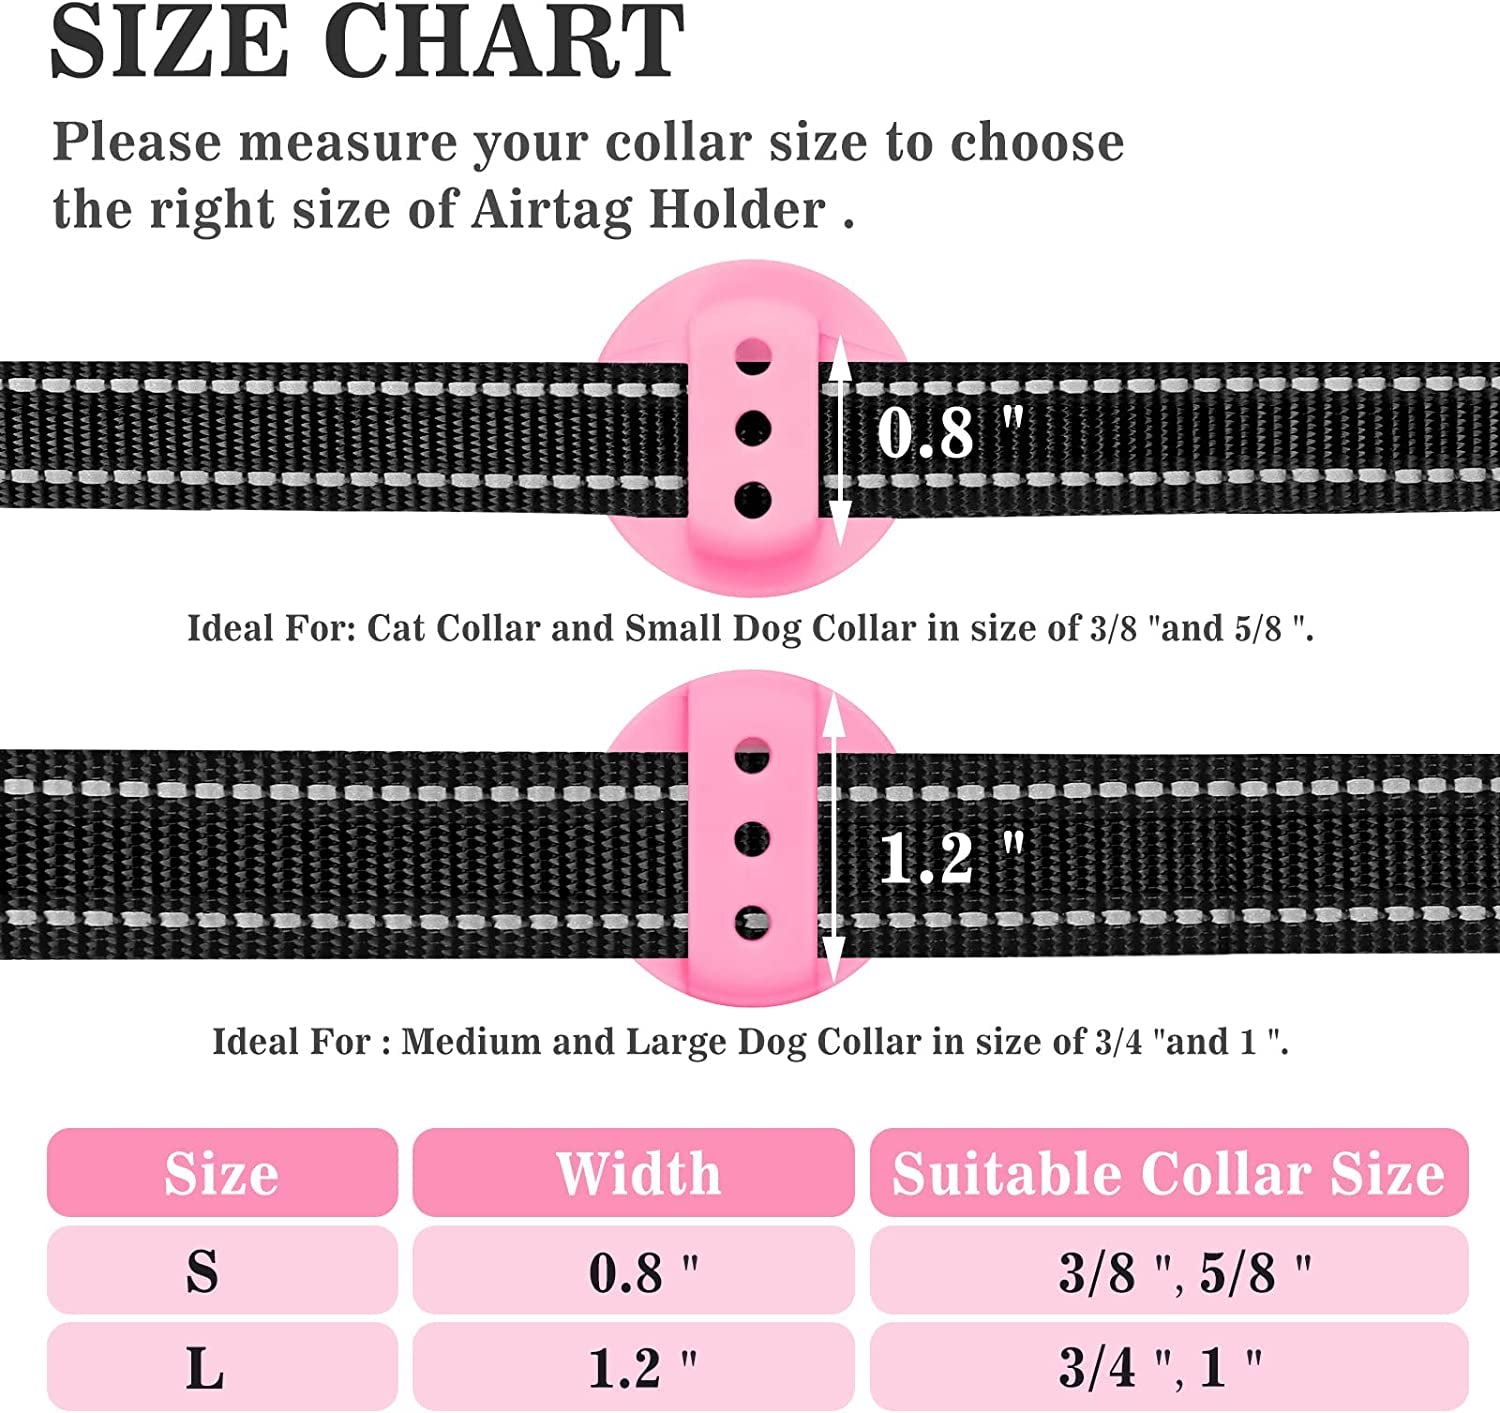 MOOGROU Airtag Dog Collar Holder 2 Pack,Newest Premium Protective Case for Apple Air Tag Tracker,Lightweight Silicone Airtag Case for Cat Collar Pet Loops,Waterproof Airtag.Dog Collar Holder Pink S